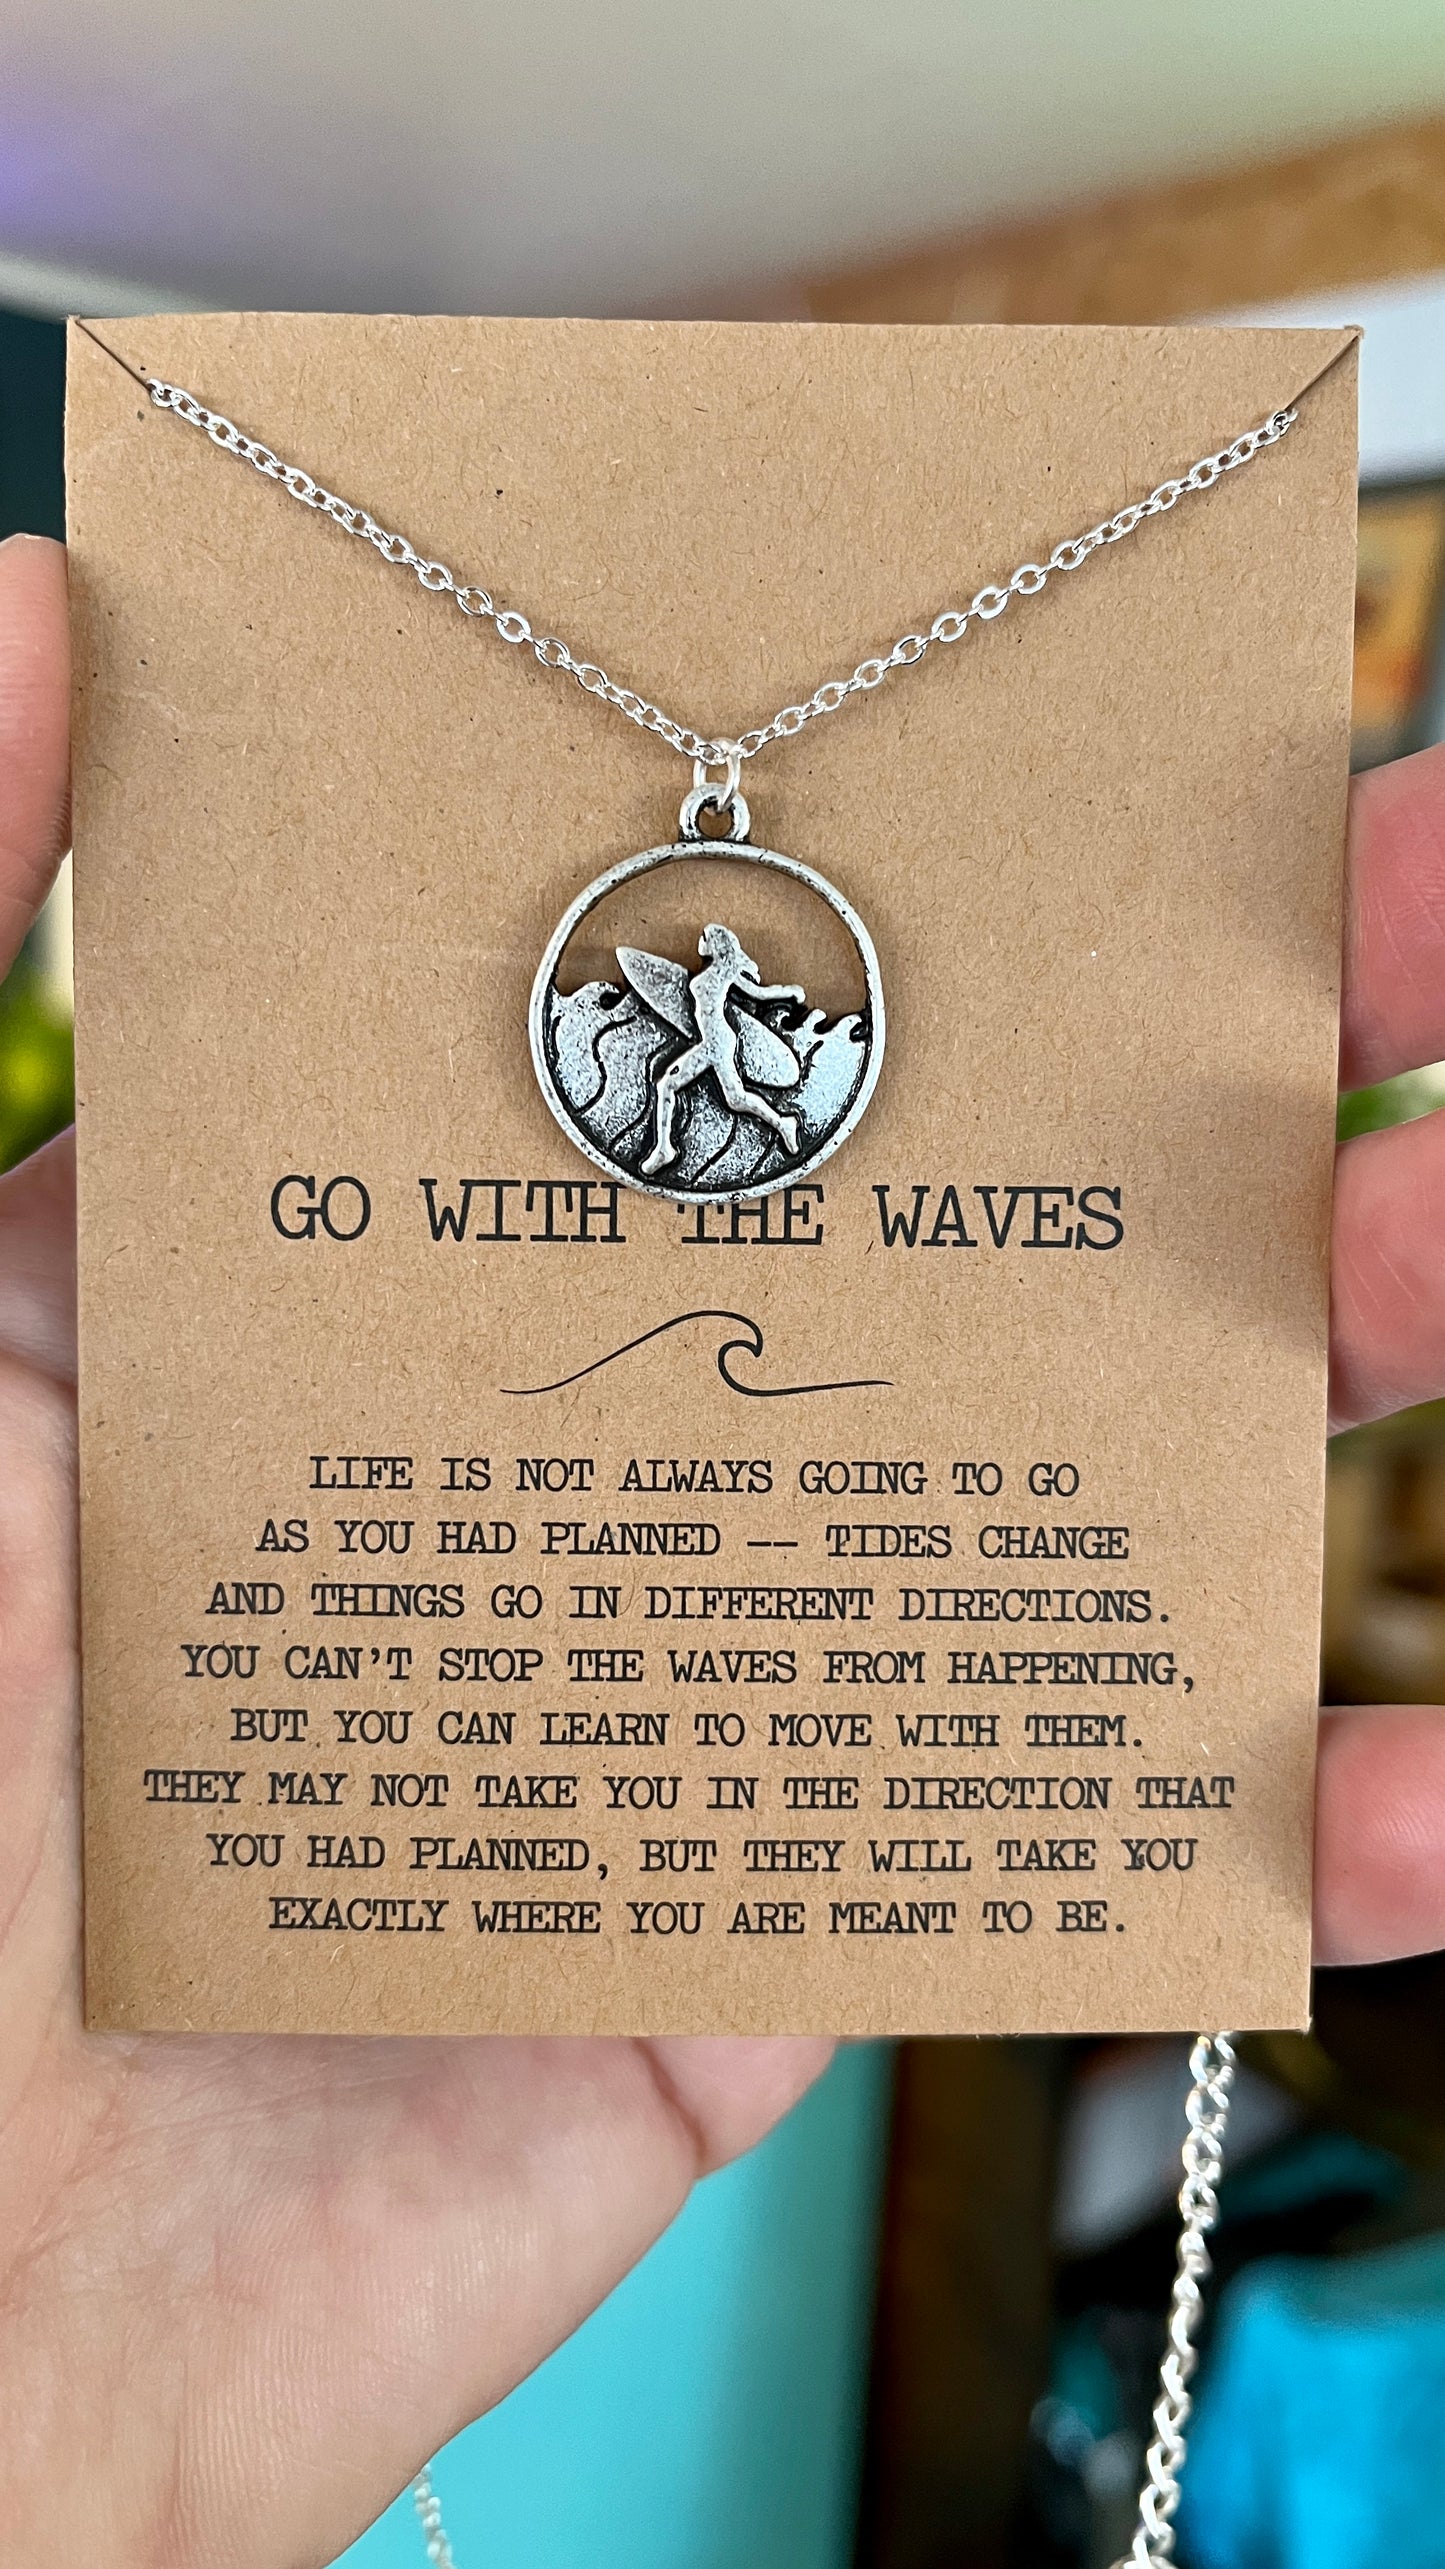 Go With the Waves jewelry